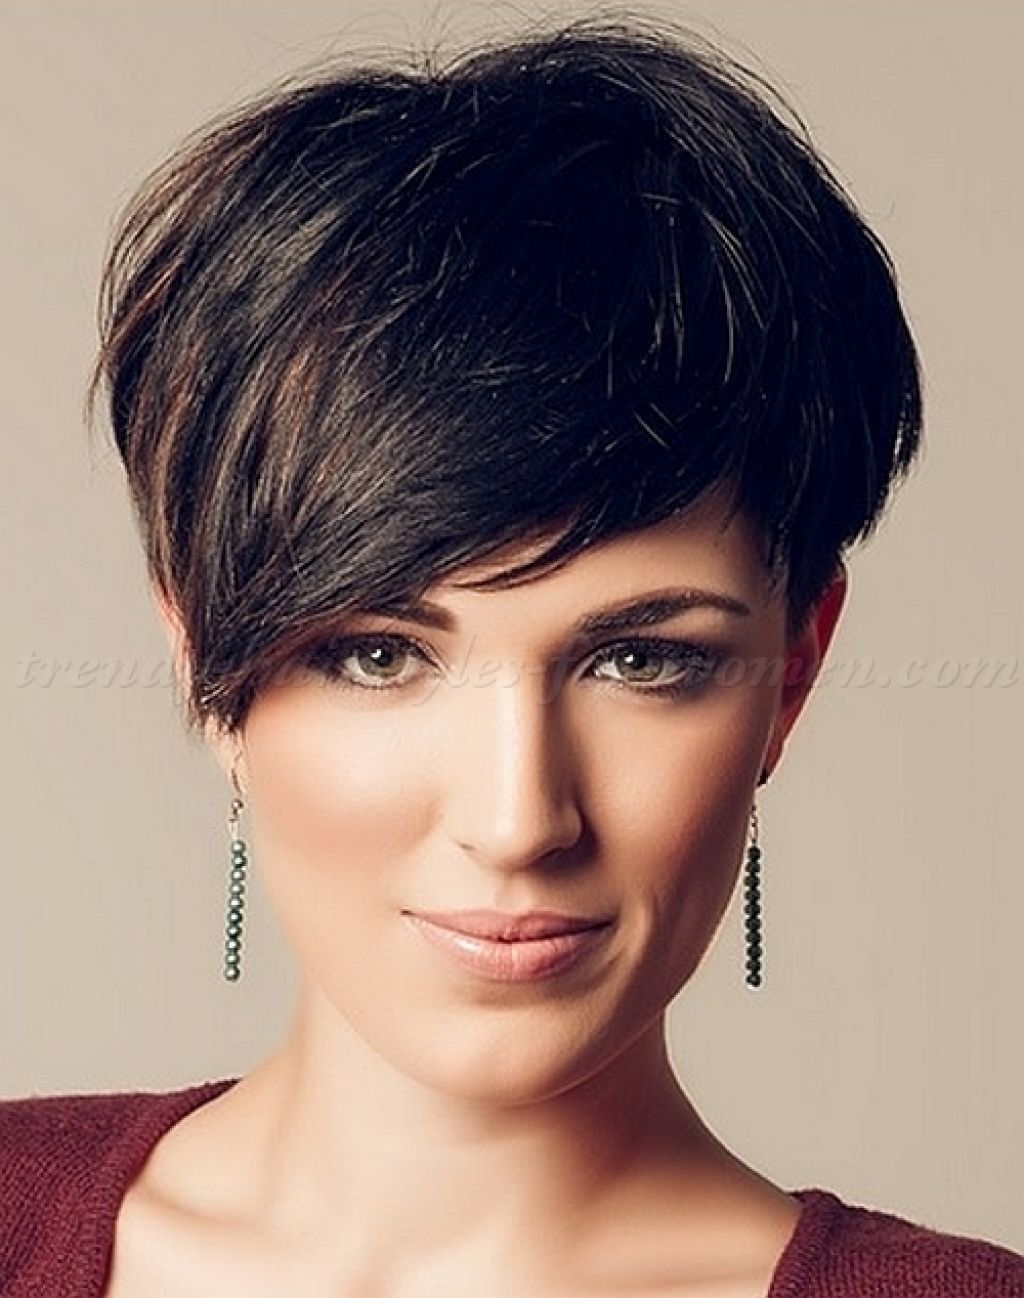 Image Result For Asymmetrical Short Haircuts | Look | Pinterest Within Asymmetrical Short Haircuts For Women (Photo 17 of 25)